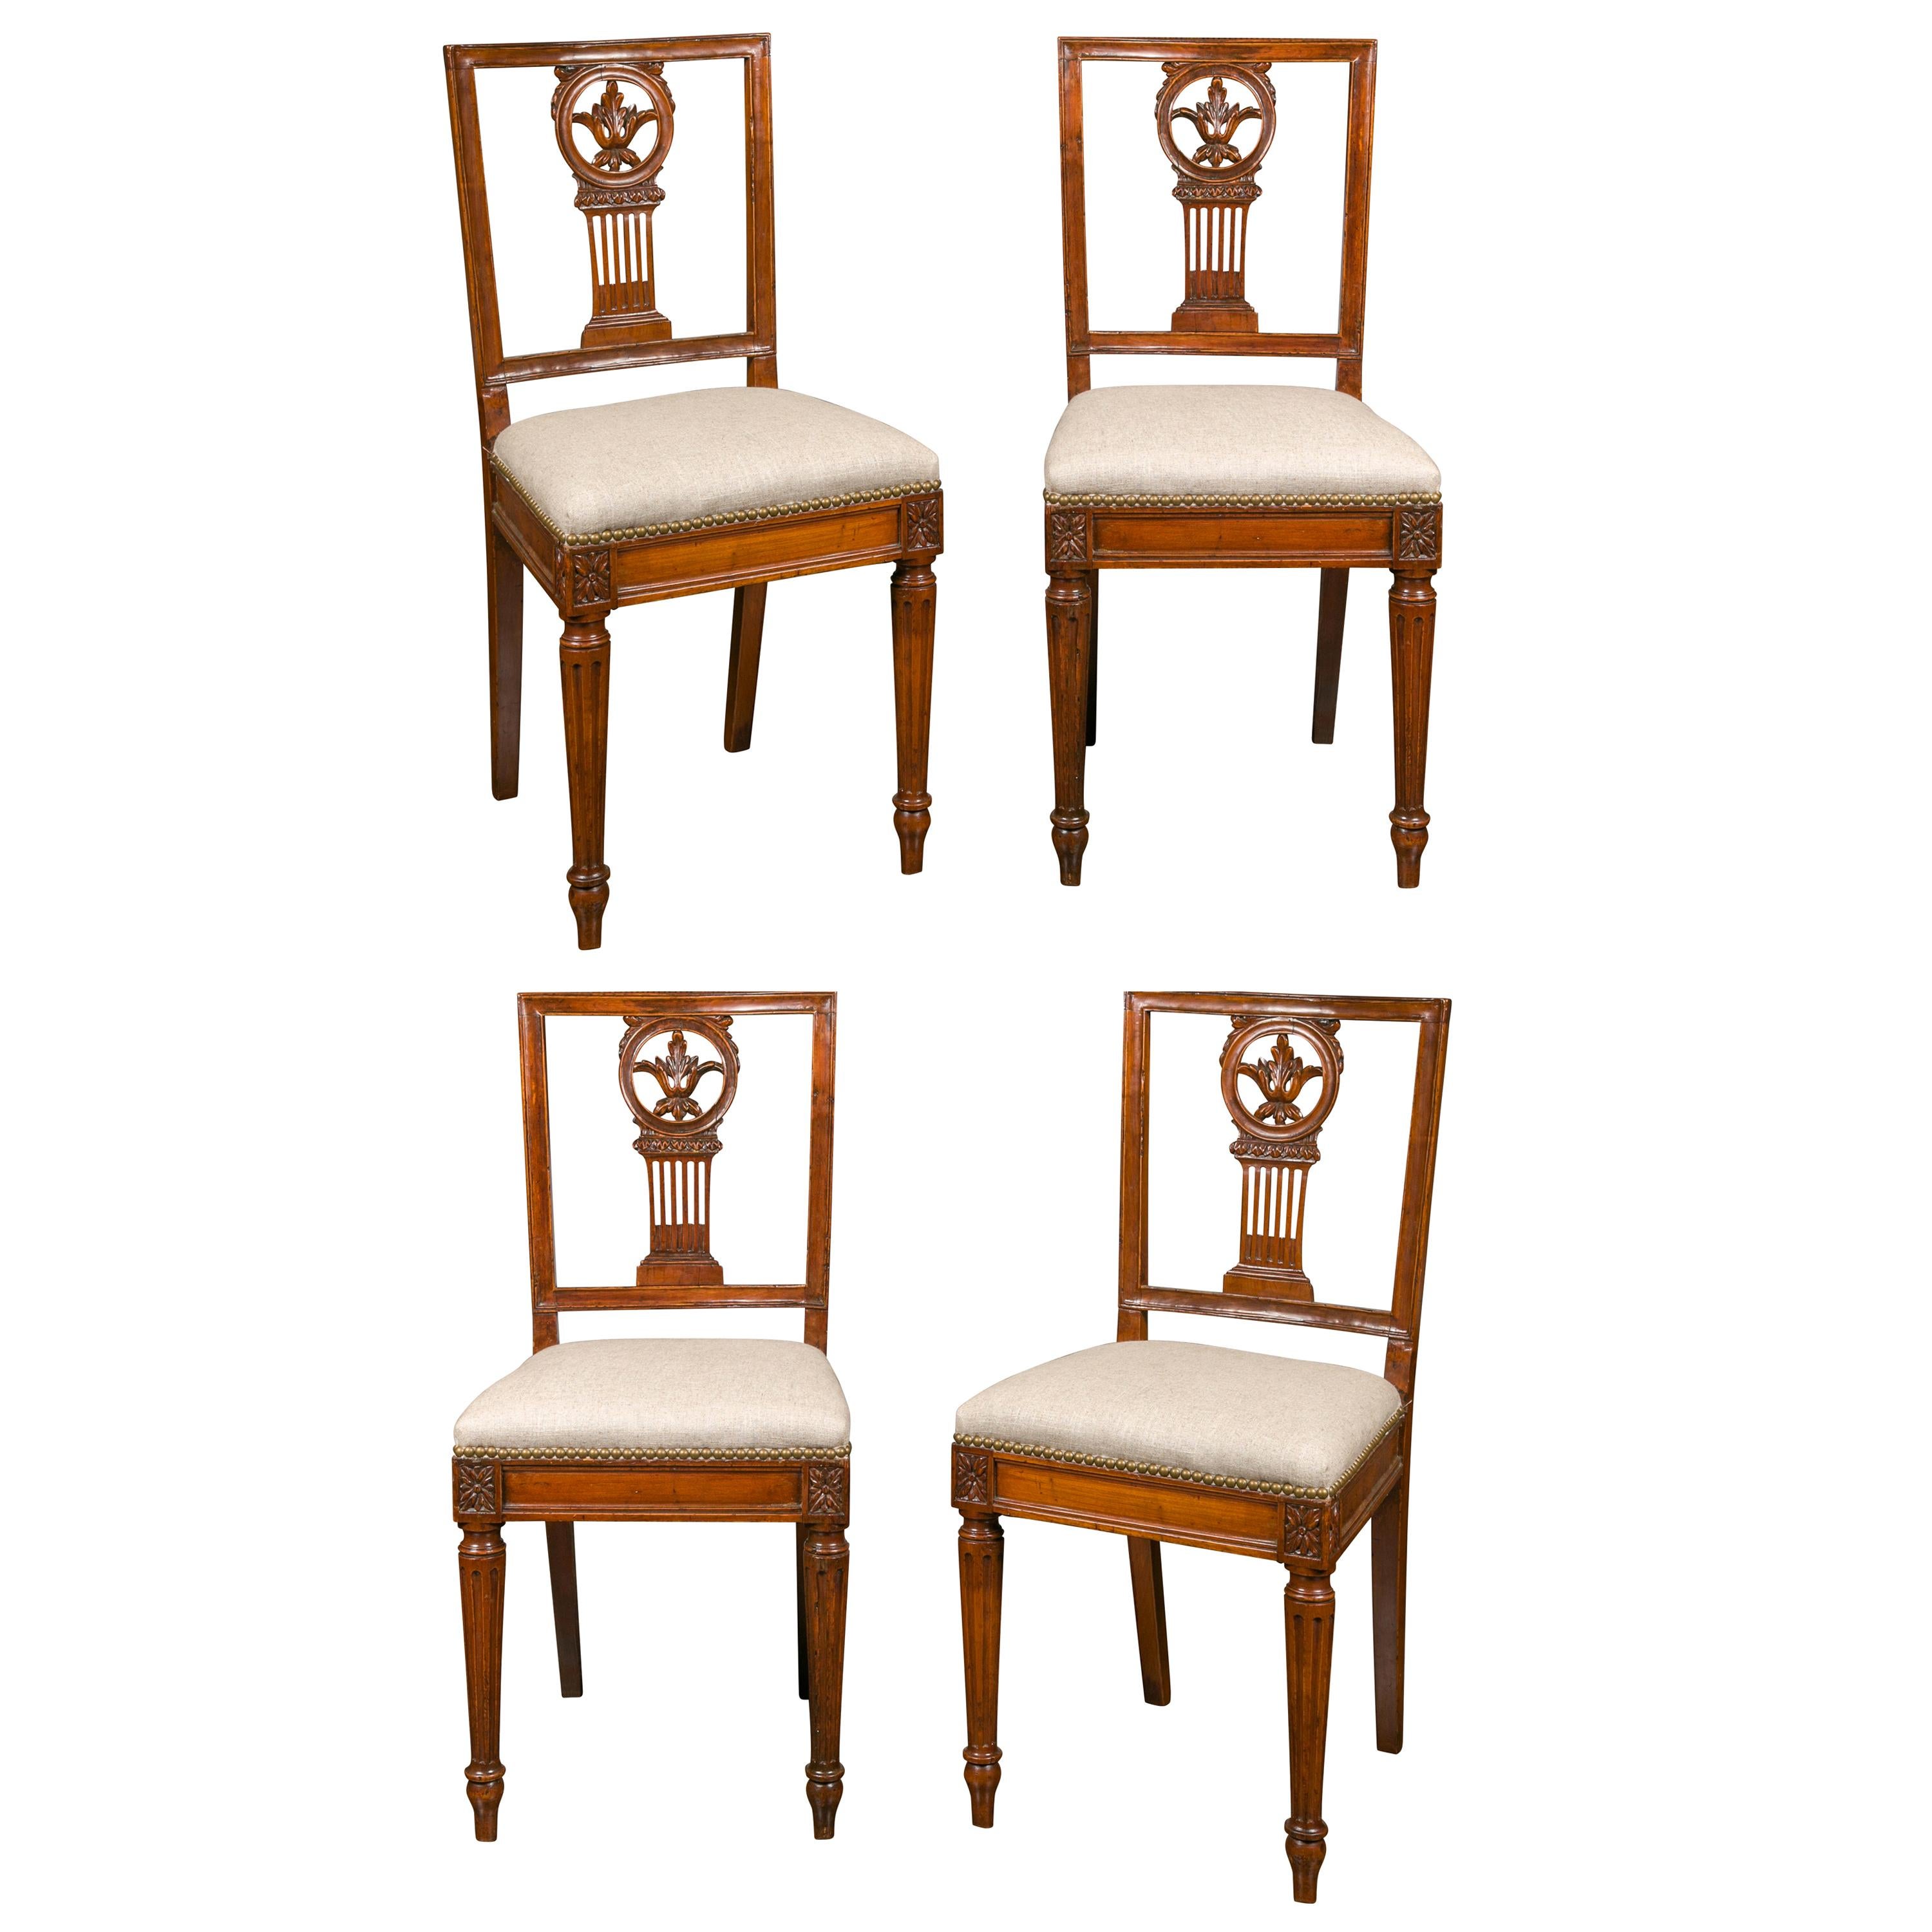 Set of Four Italian 1820s Neoclassical Dining Room Chairs with Carved Splats